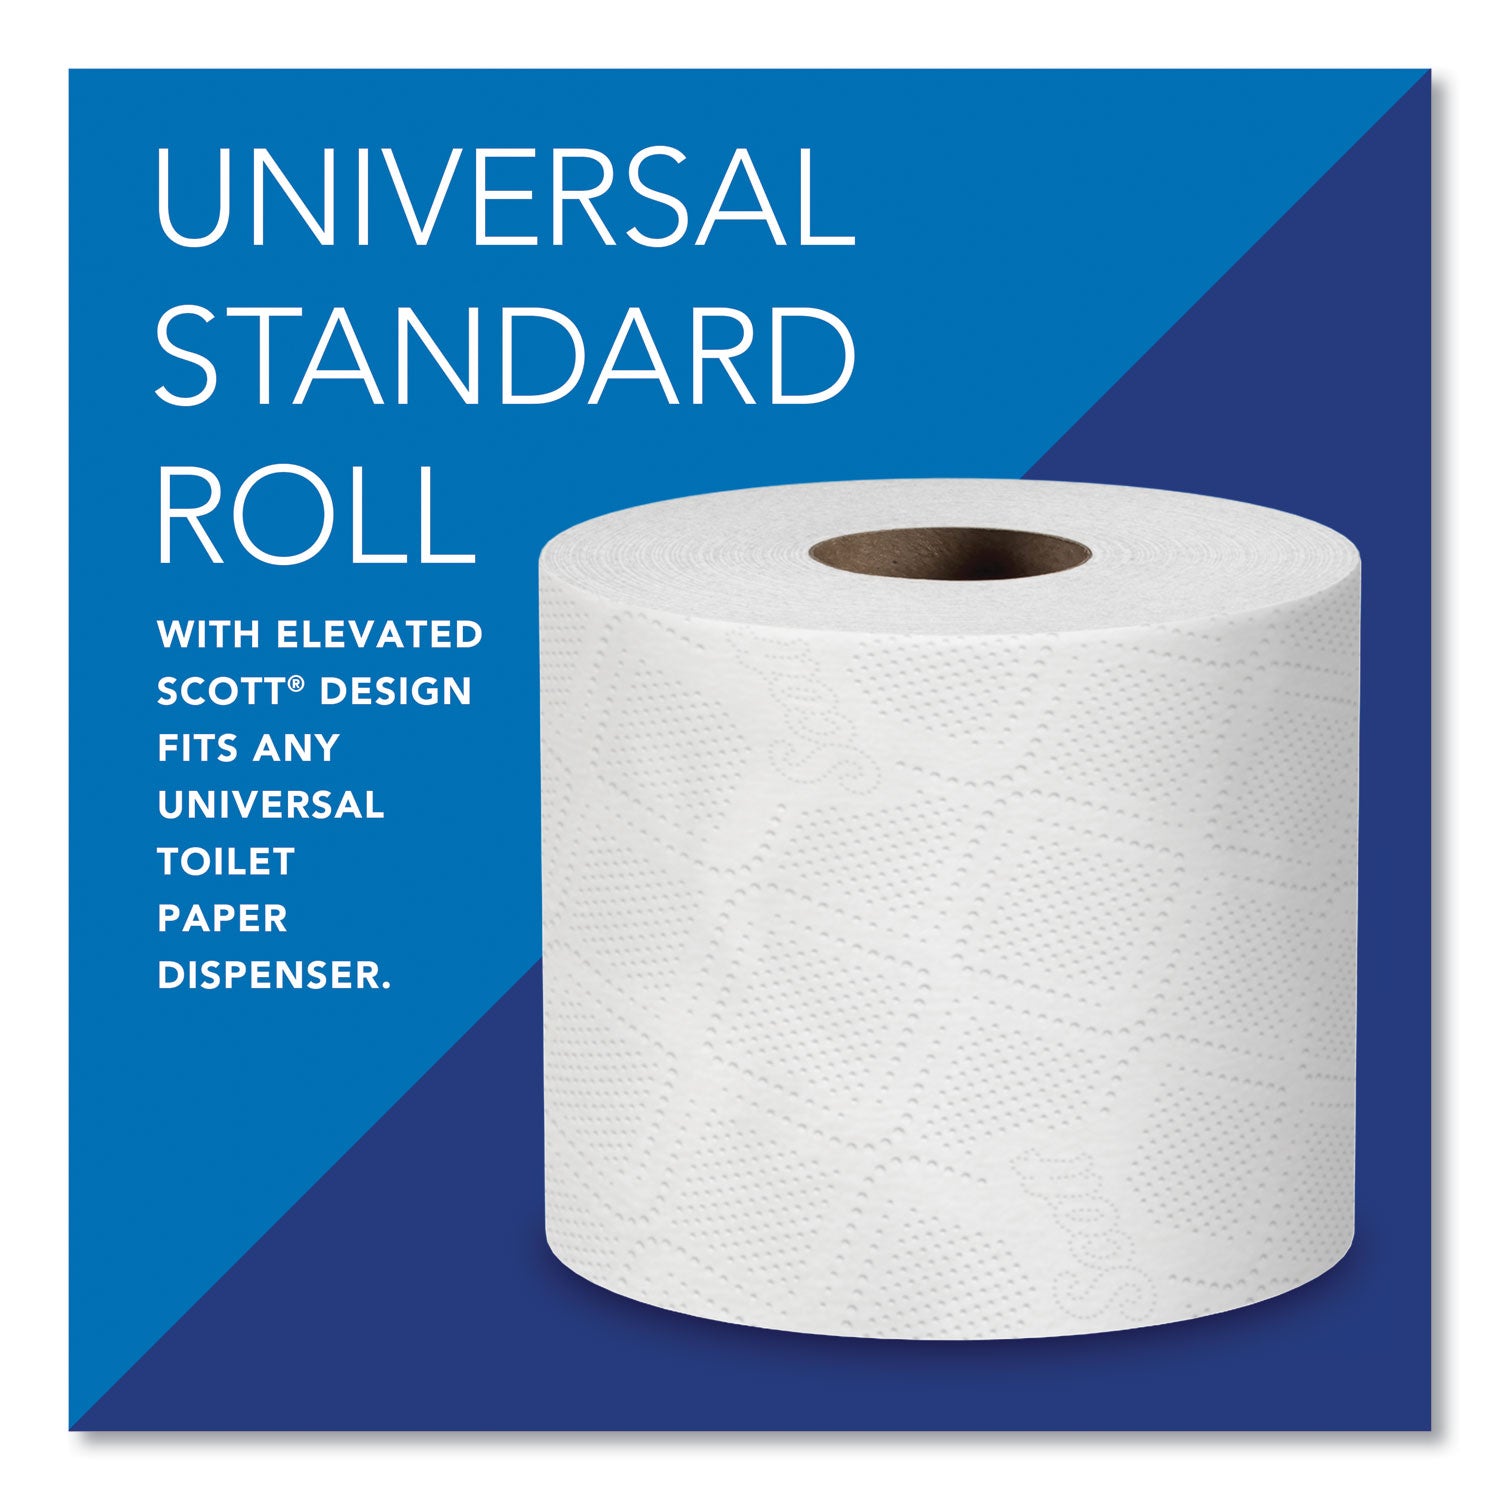 Essential Standard Roll Bathroom Tissue for Business, Septic Safe, Convenience Carton, 2-Ply, White, 550/Roll, 20 Rolls/CT - 